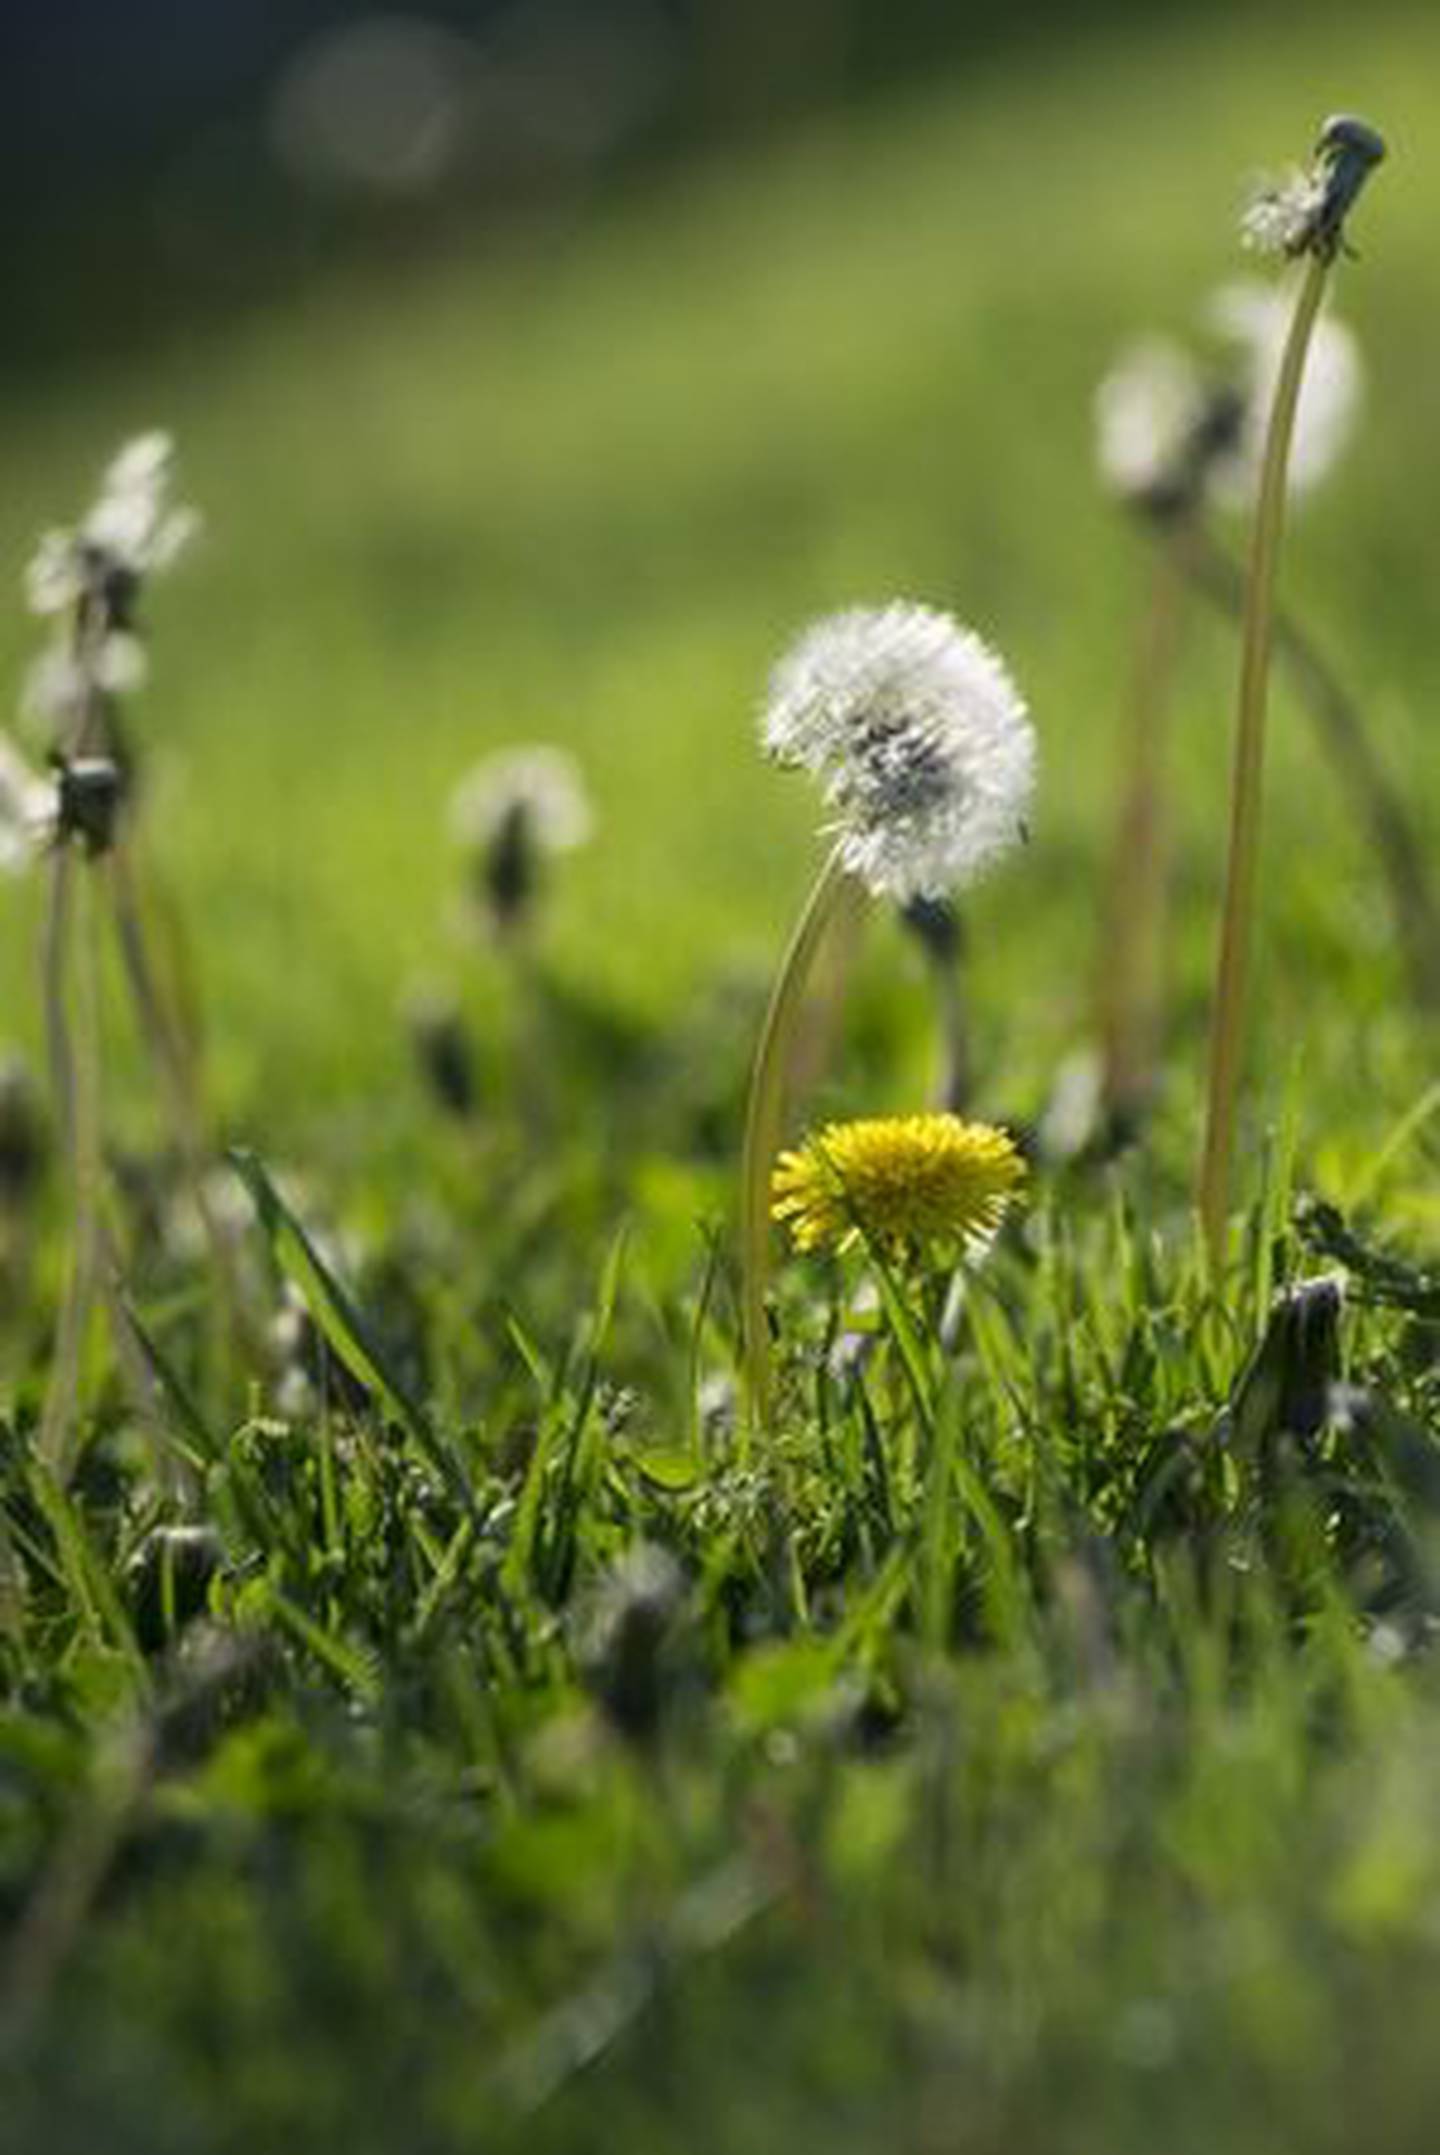 You have to get to the tap root to weed out dandelions.  A pronged weeding tool can help in this fight, but if you don't get the whole root, the dandelion will return the following year.  If you can, consider leaving a few in the yard as dandelions are a fertile feeding ground for bees and other pollinators.